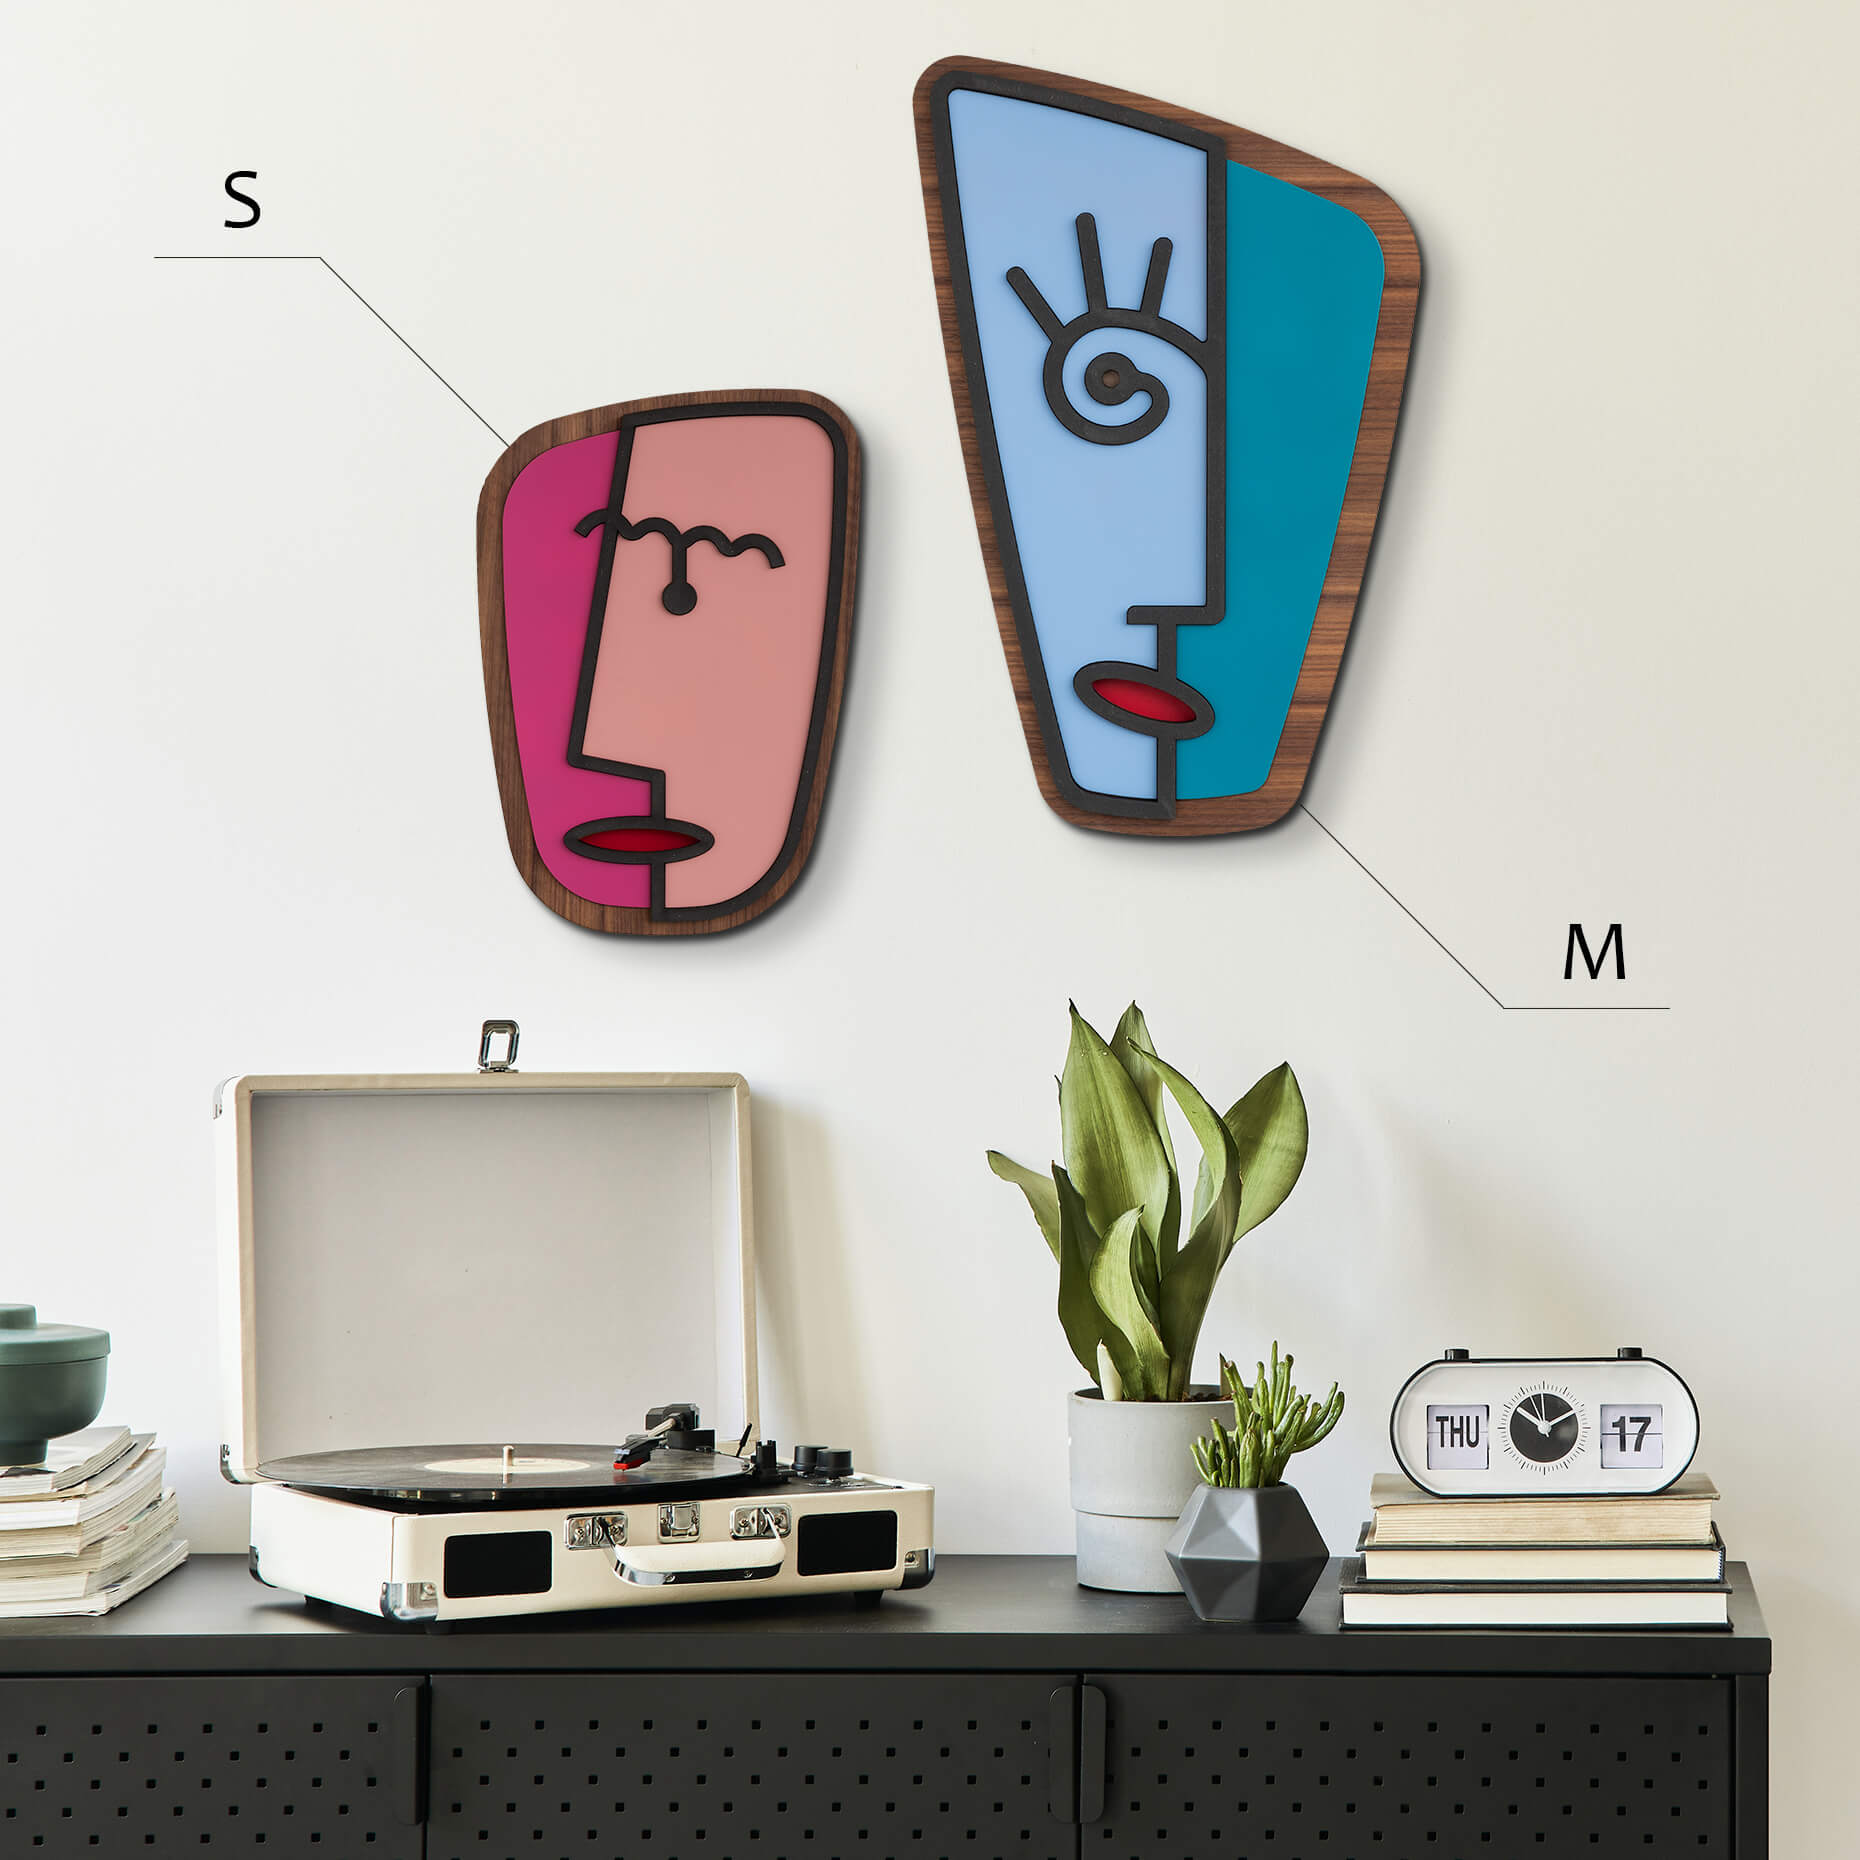 Use your imagination to bring your home to life with this original Picasso line drawing